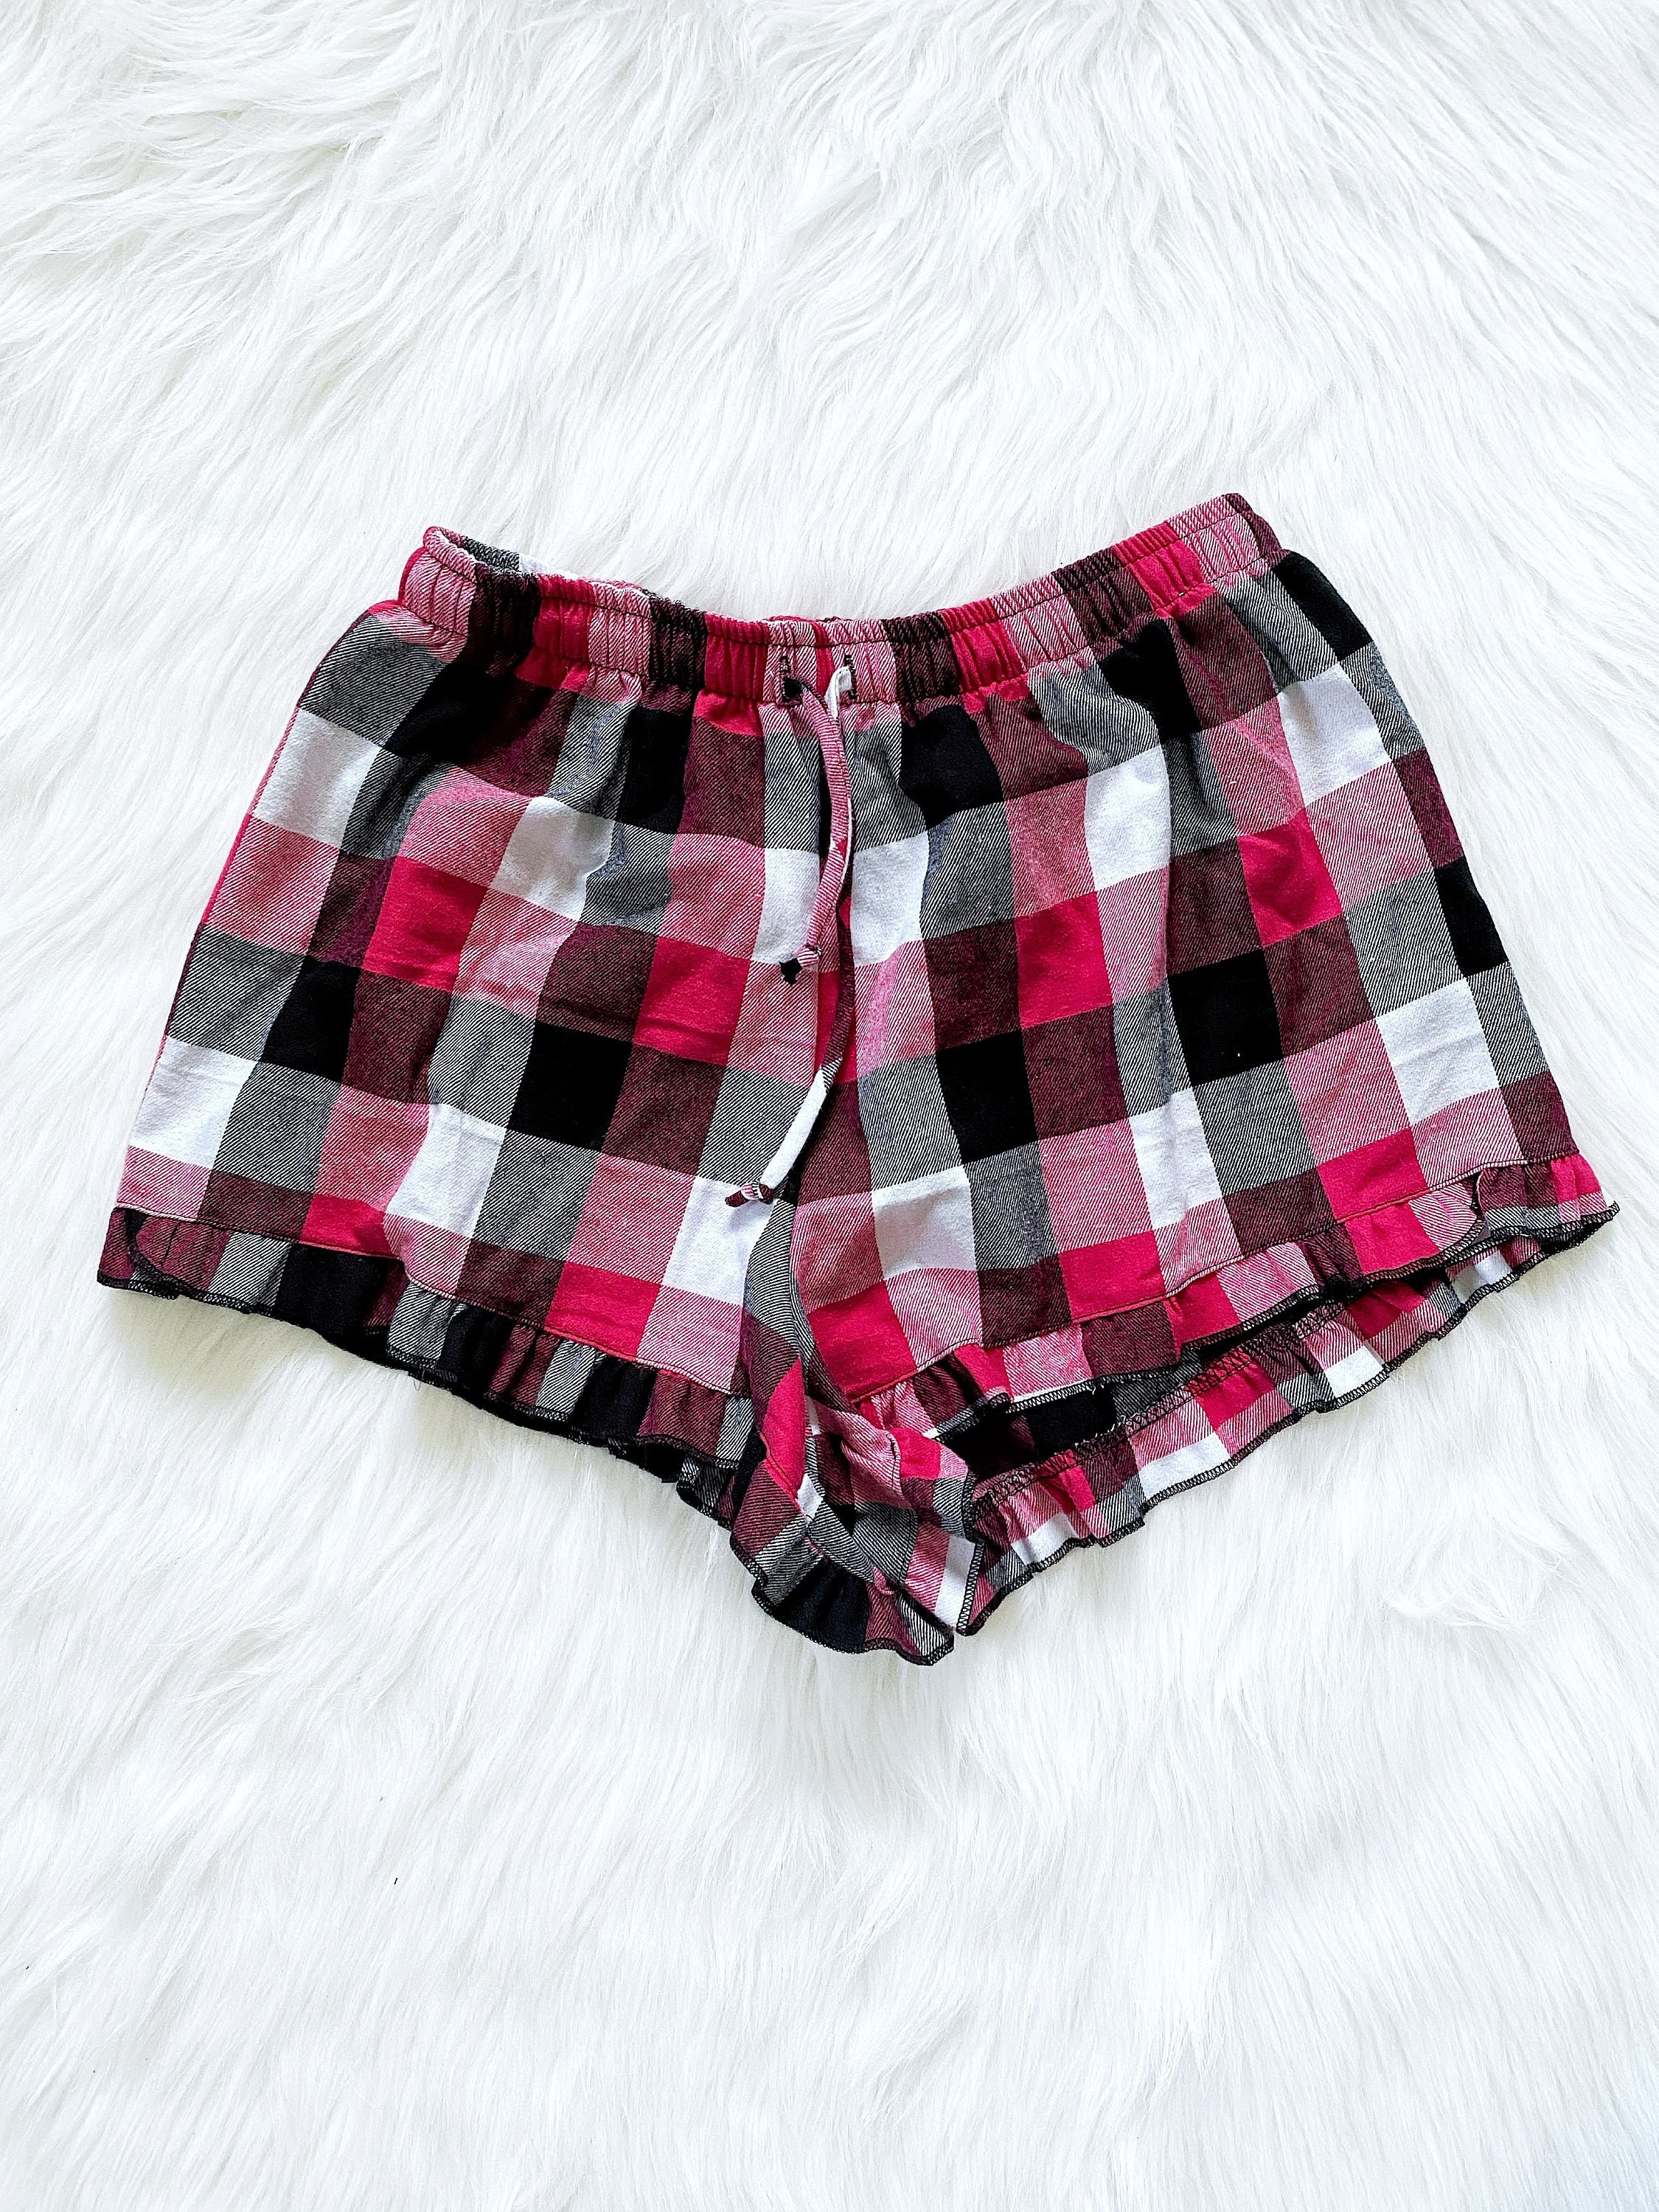 Plaid Flannel Shorts Red White Black Christmas Winter Adult Pajama Bottoms  Women Birthday Gift Wedding Bridesmaid Bridal Party XS S M L XL -   Canada